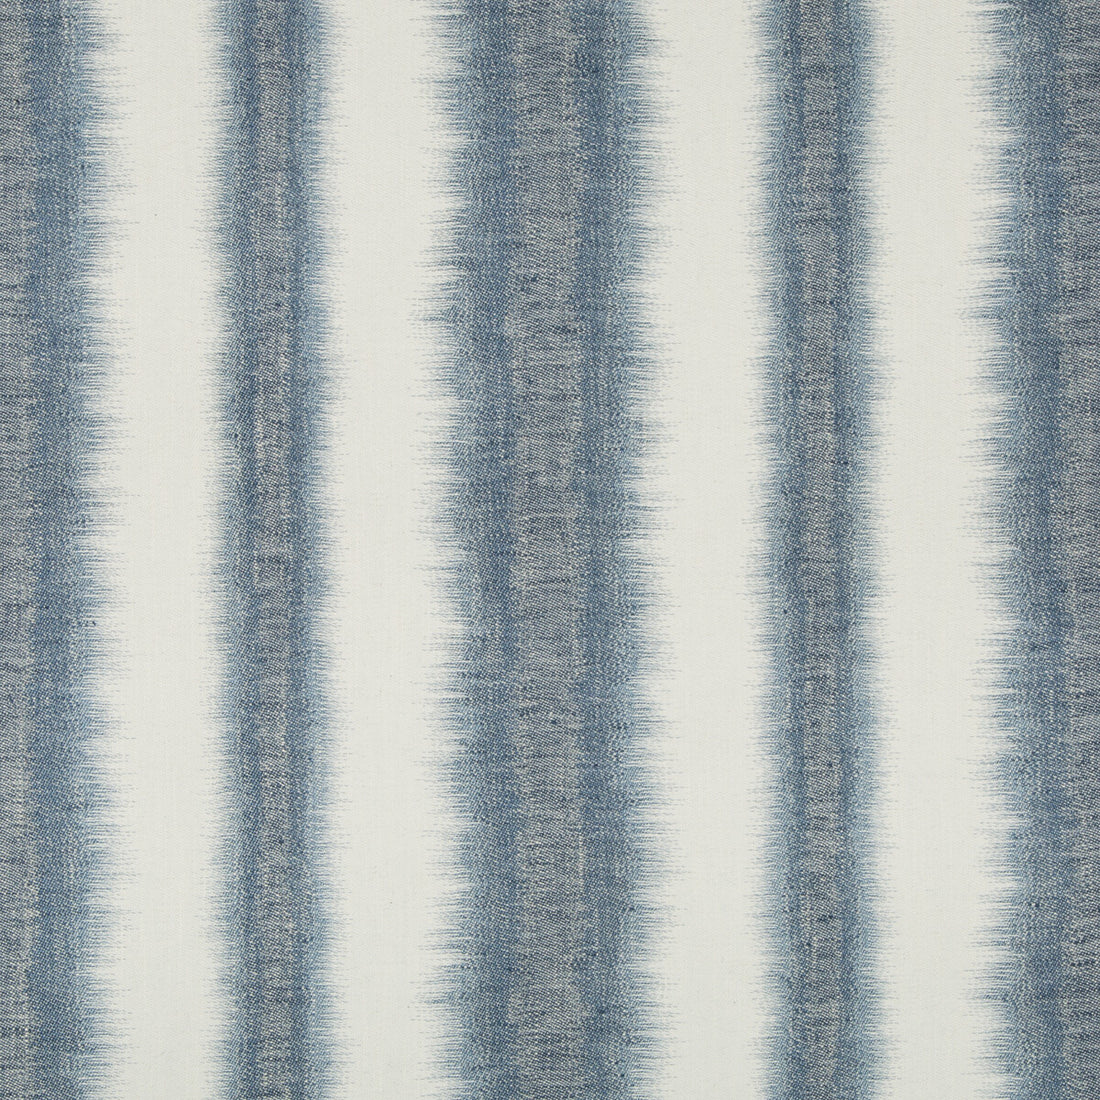 Windswell fabric in pacific color - pattern 34979.15.0 - by Kravet Basics in the Jeffrey Alan Marks Oceanview collection